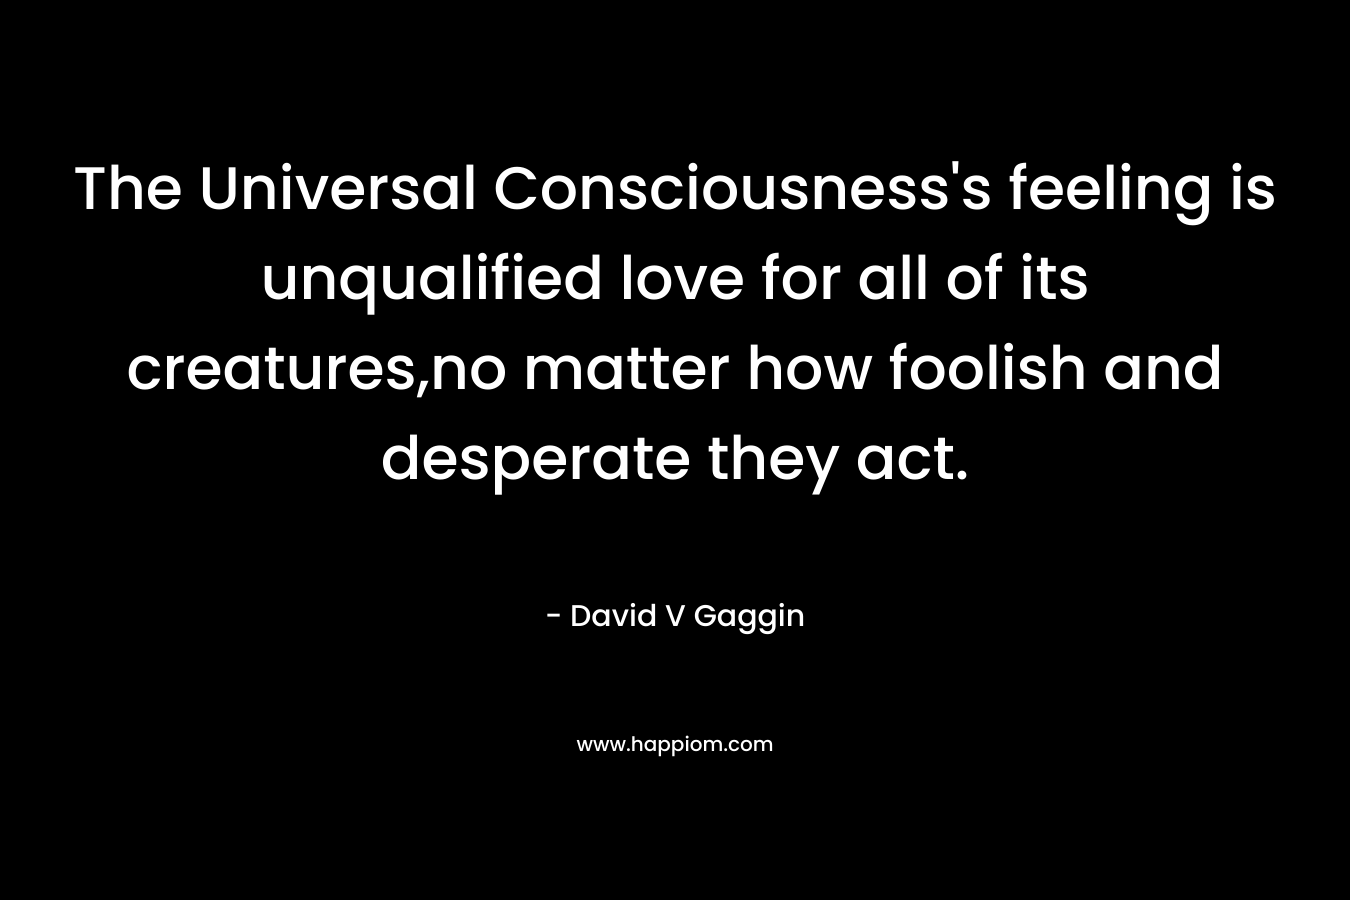 The Universal Consciousness's feeling is unqualified love for all of its creatures,no matter how foolish and desperate they act.